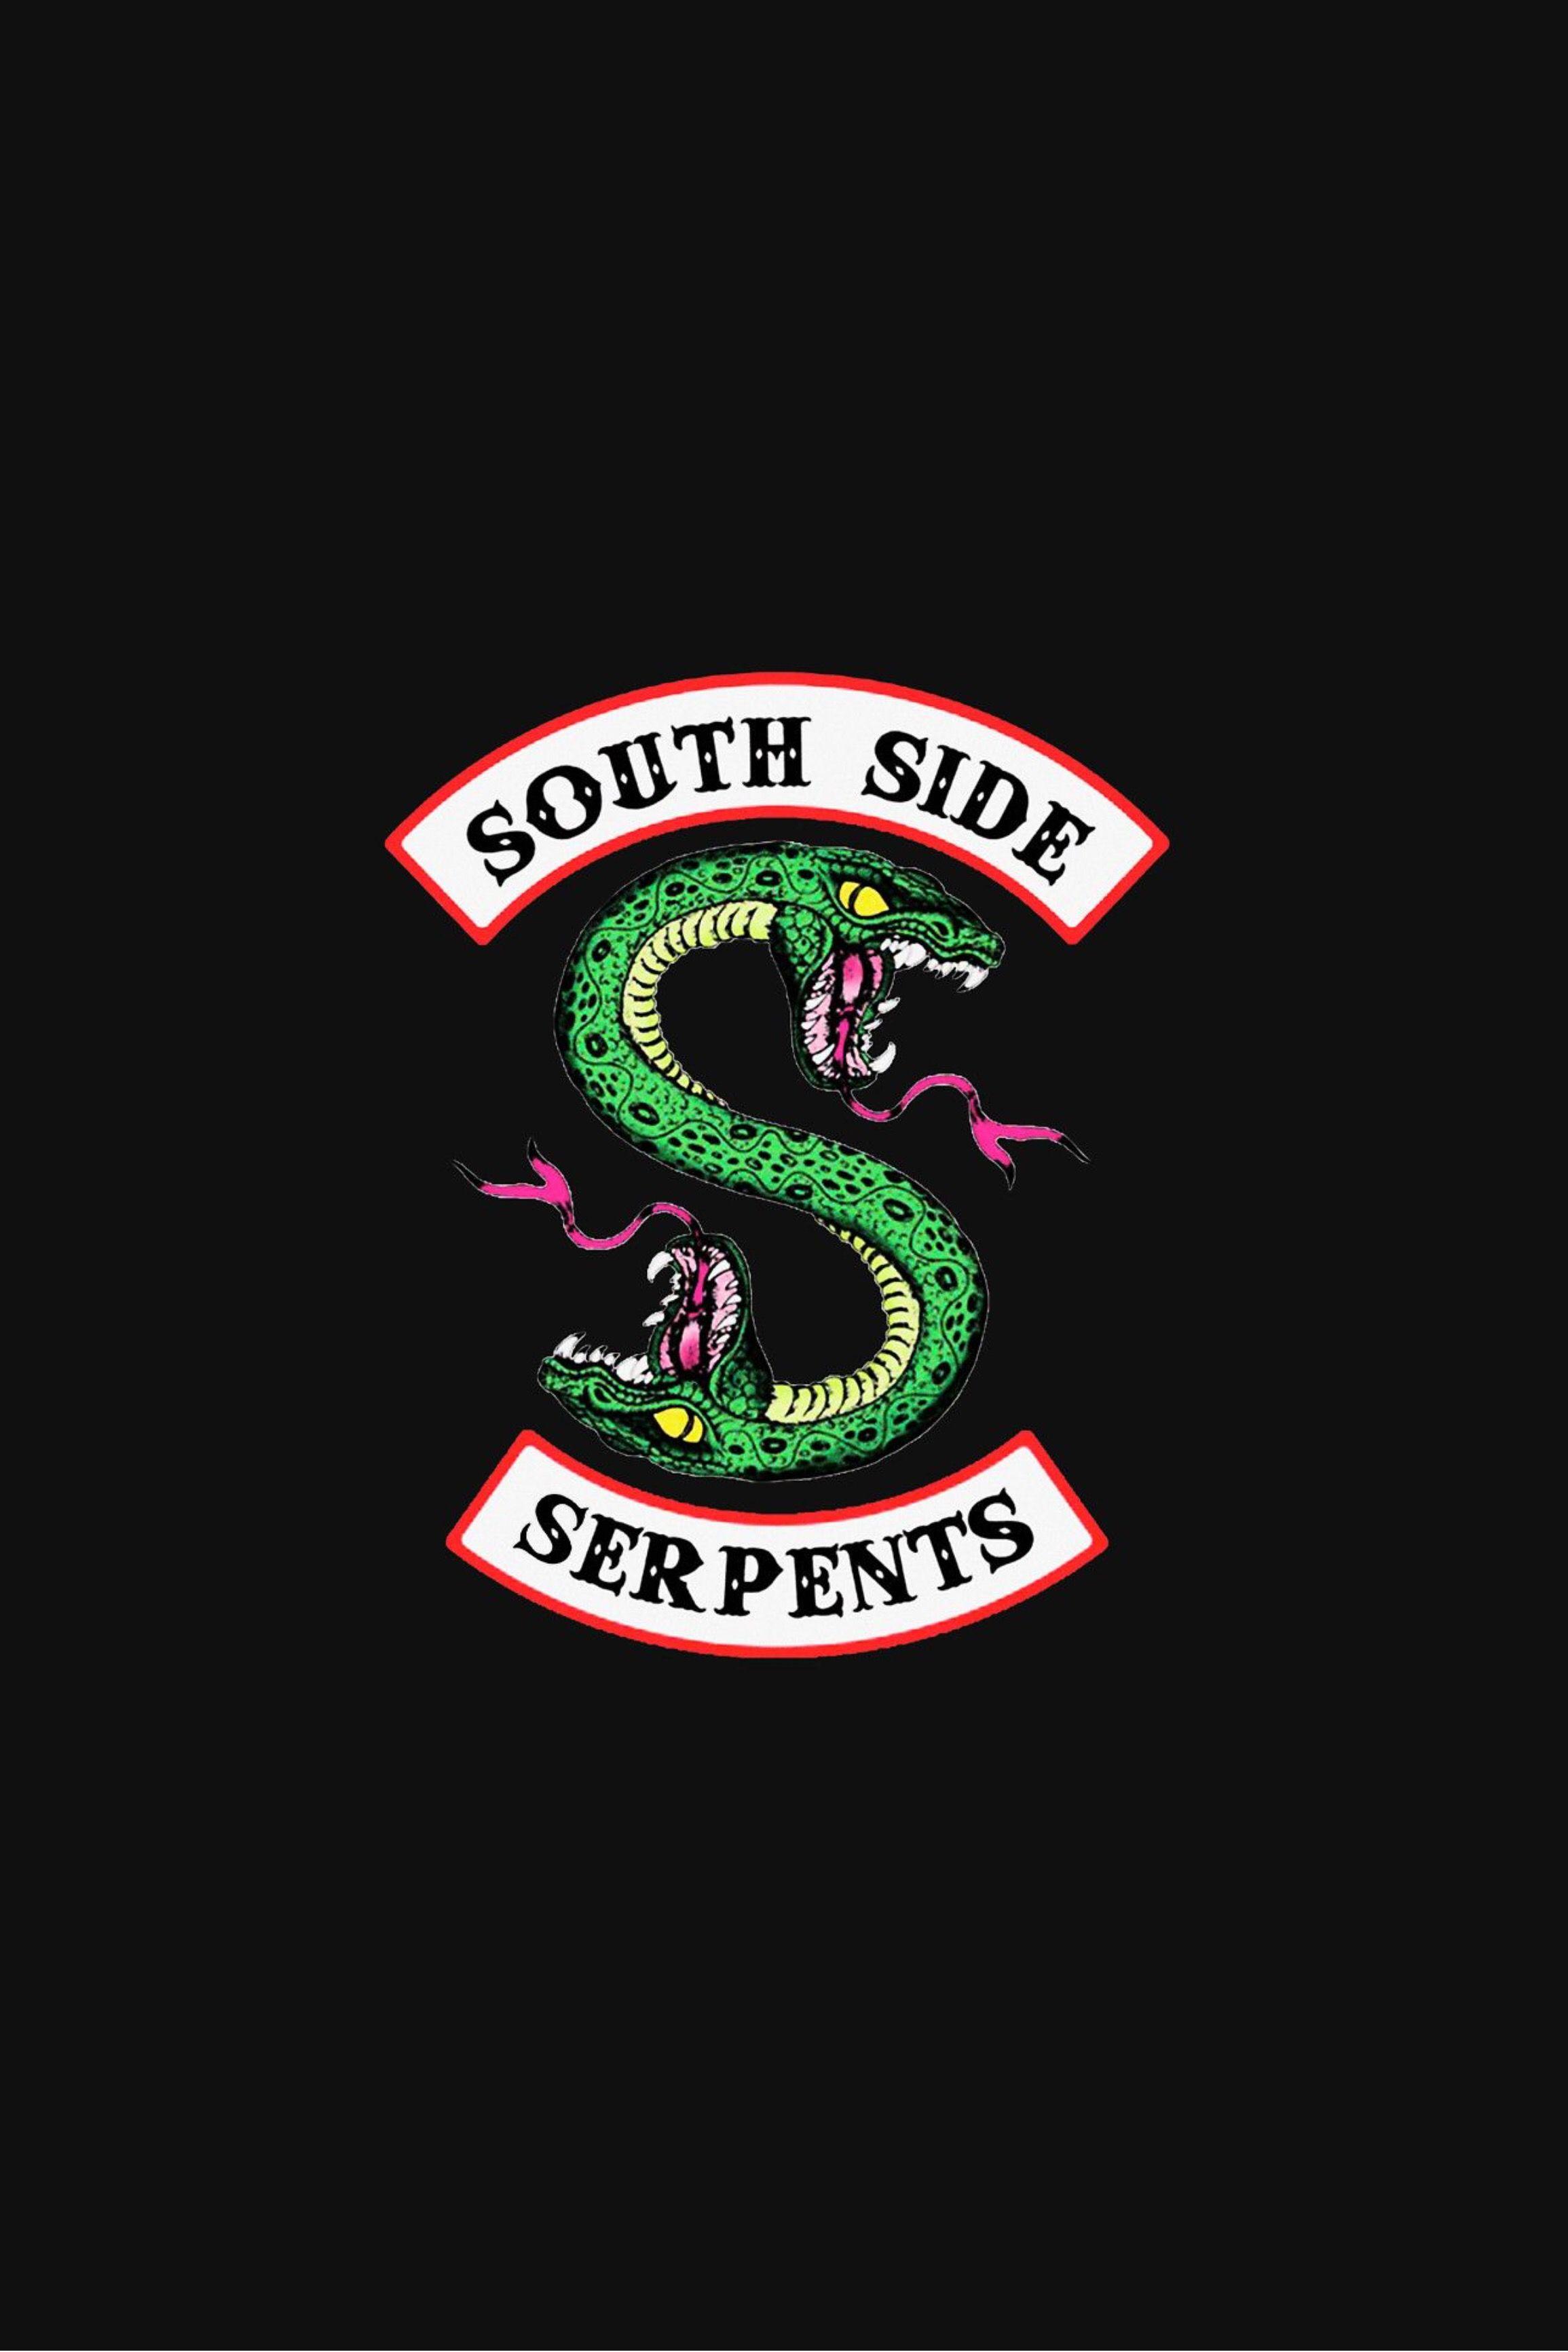 south side serpents phone wallpaper